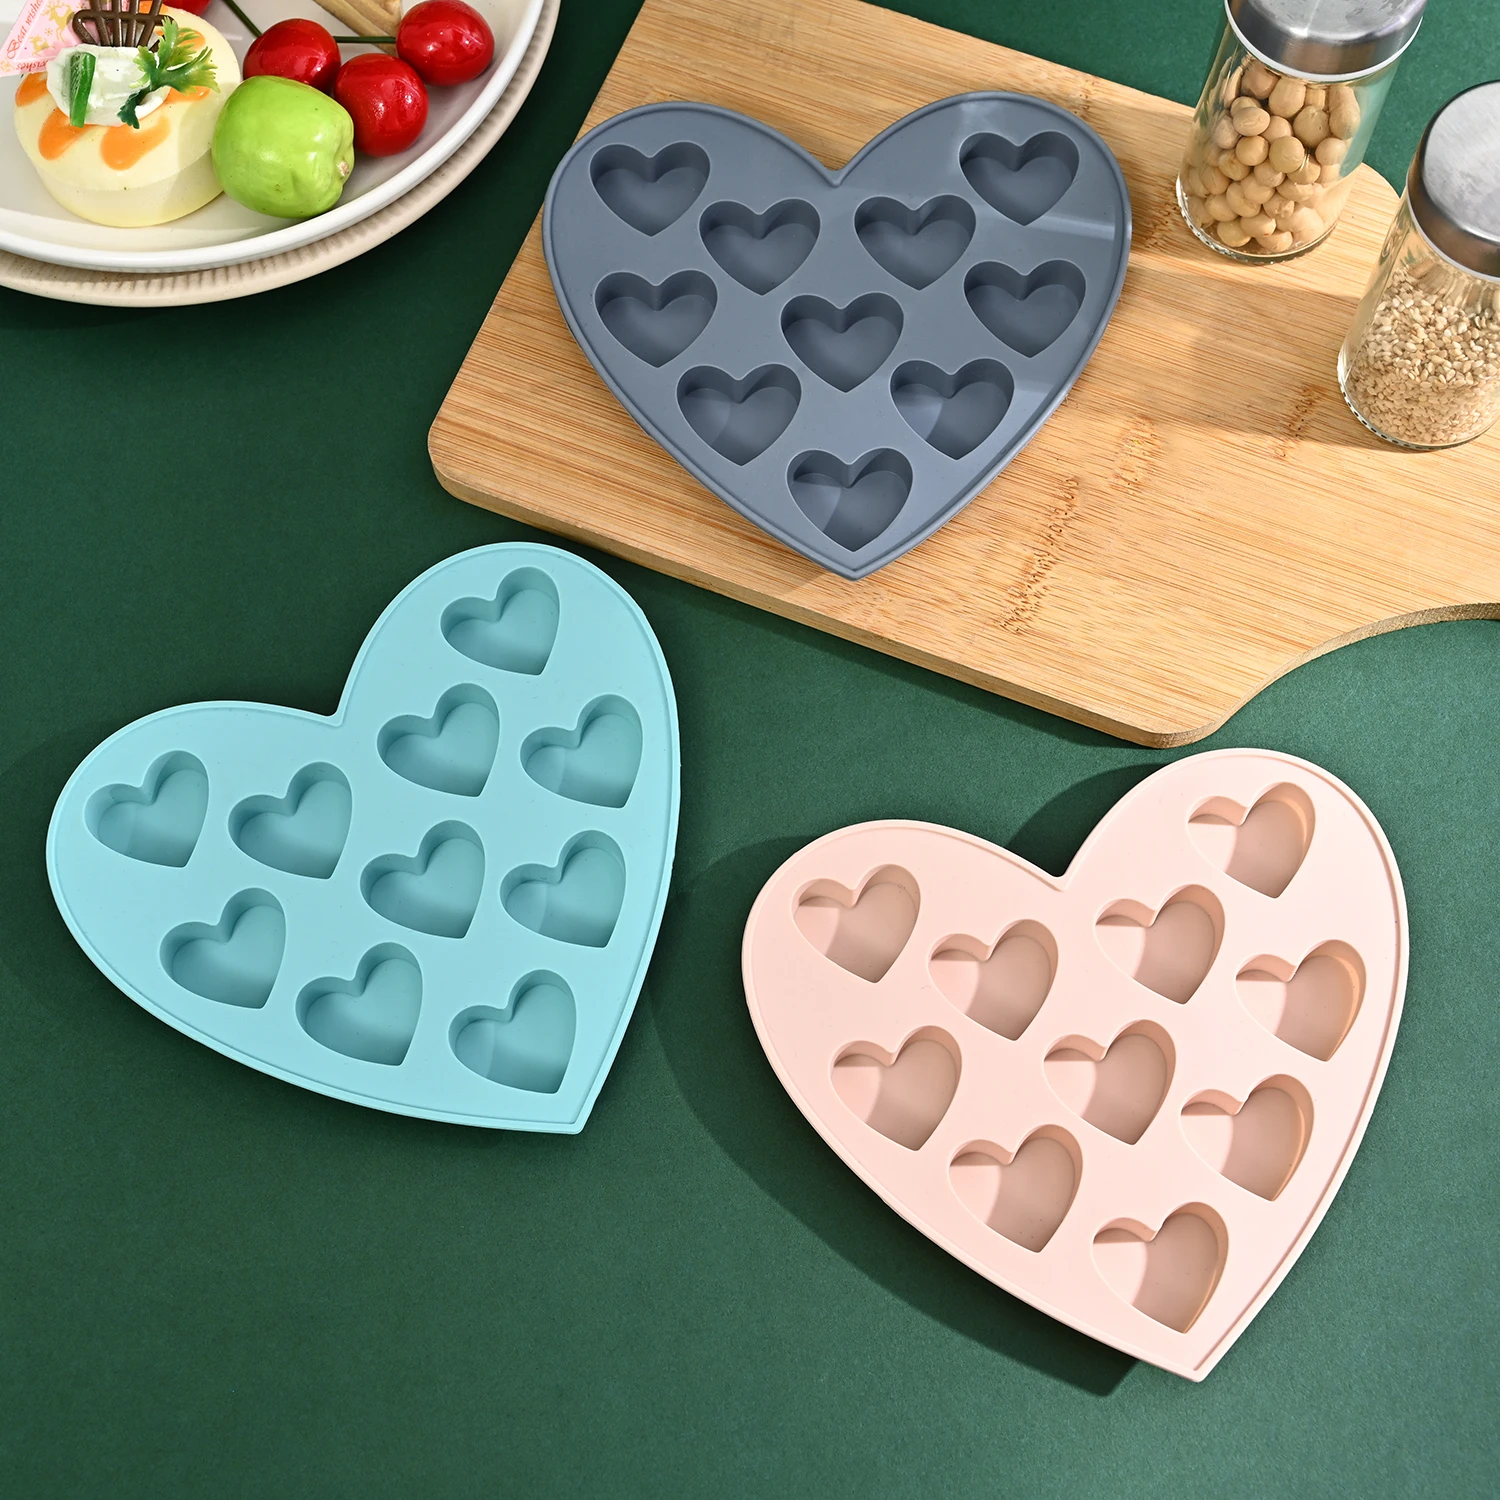 In Stock 10 Even Love Heart Silicone Chocolate Mold Valentine Diamond Heart Shaped Cake Mold